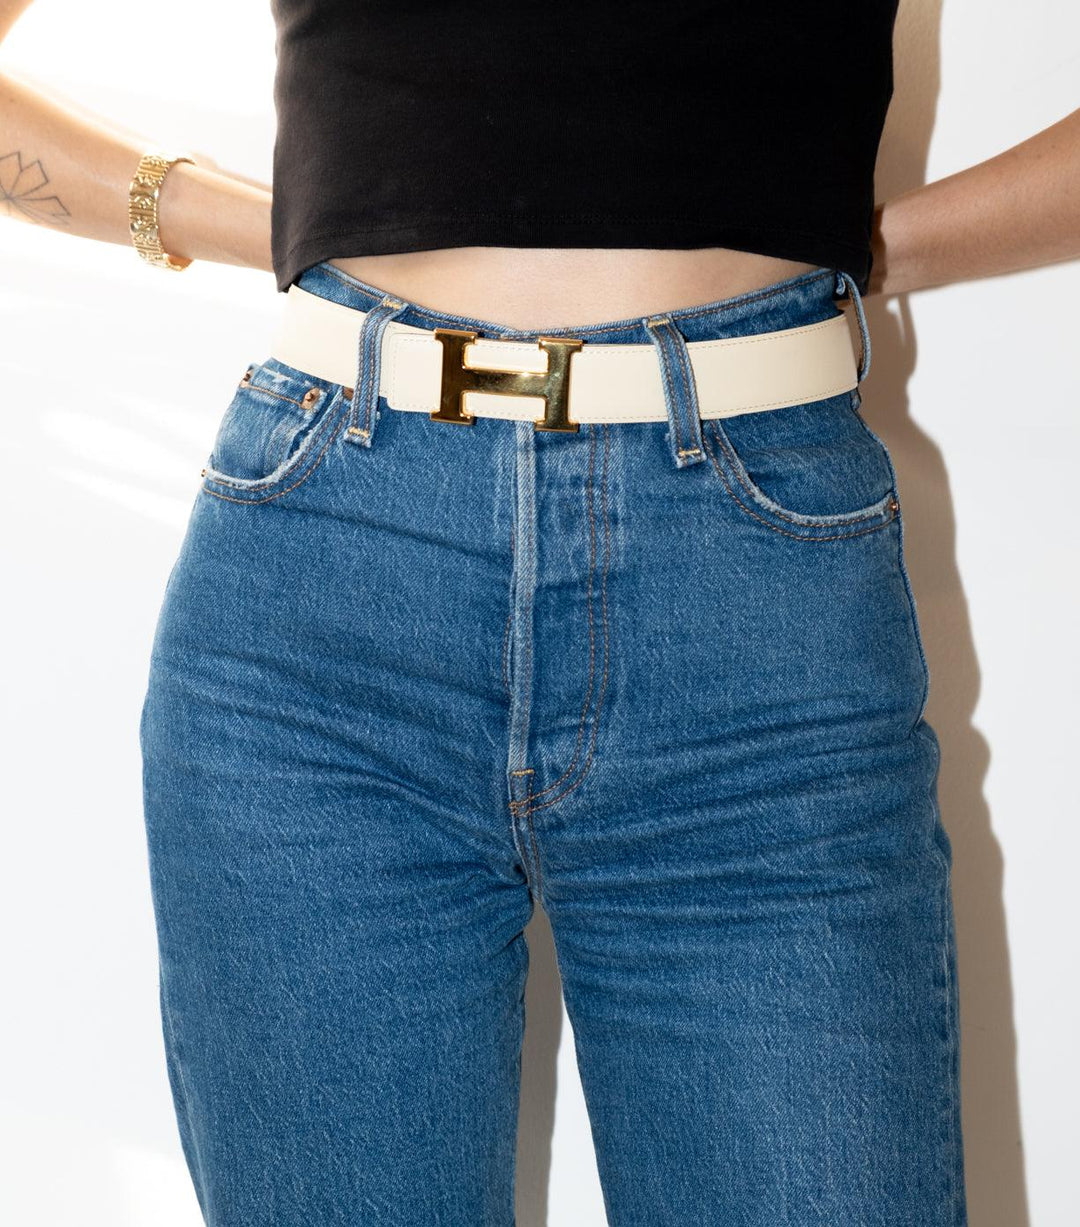 double Sided Leather Belt Gold - Volver